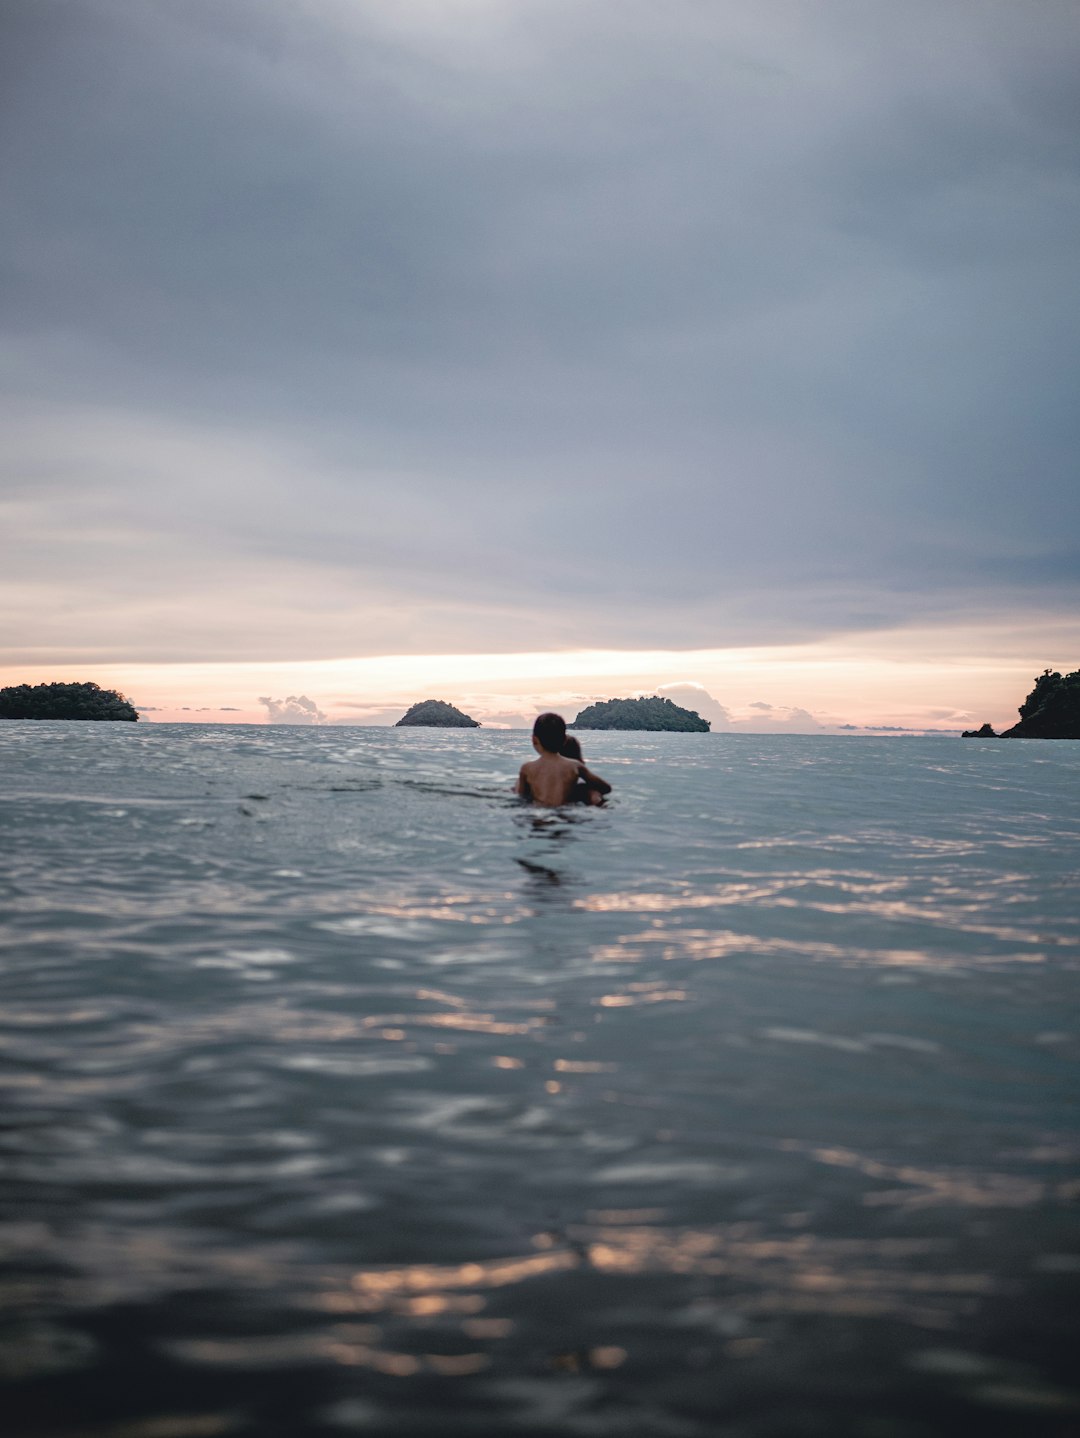 travelers stories about Ocean in Phuket, Thailand